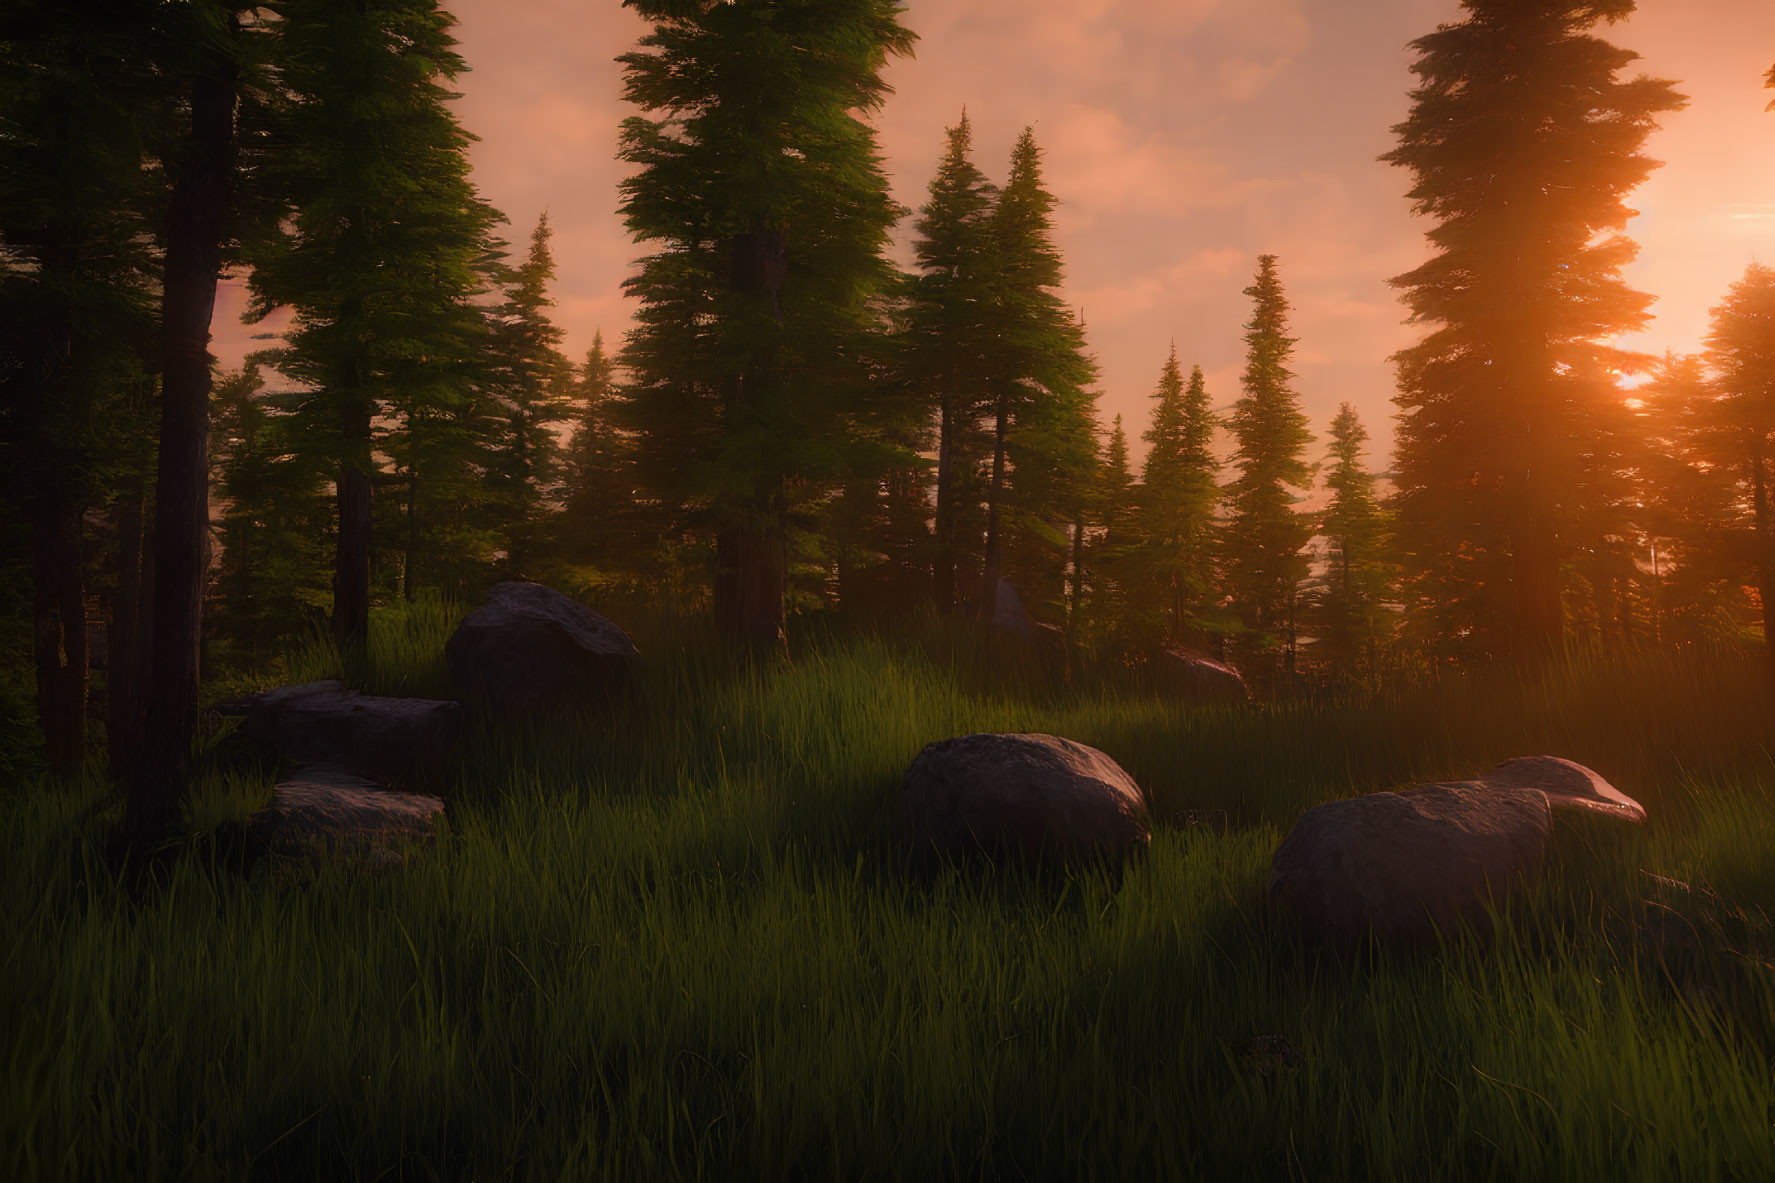 Tranquil forest sunset with tall trees and rocks in lush grass